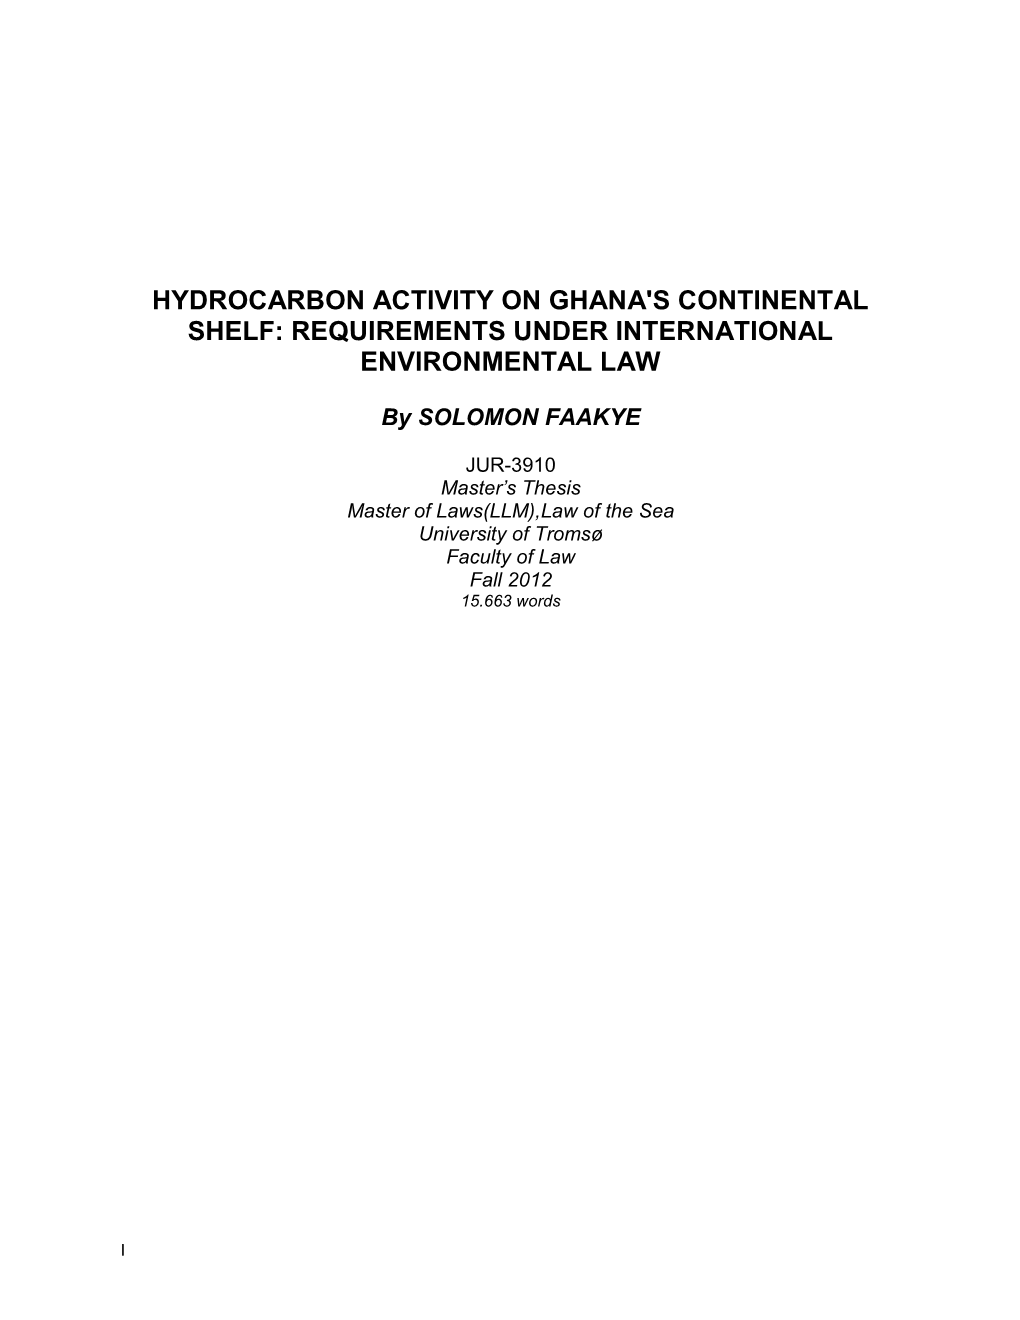 Hydrocarbon Activity on Ghana's Continental Shelf: Requirements Under International Environmental Law